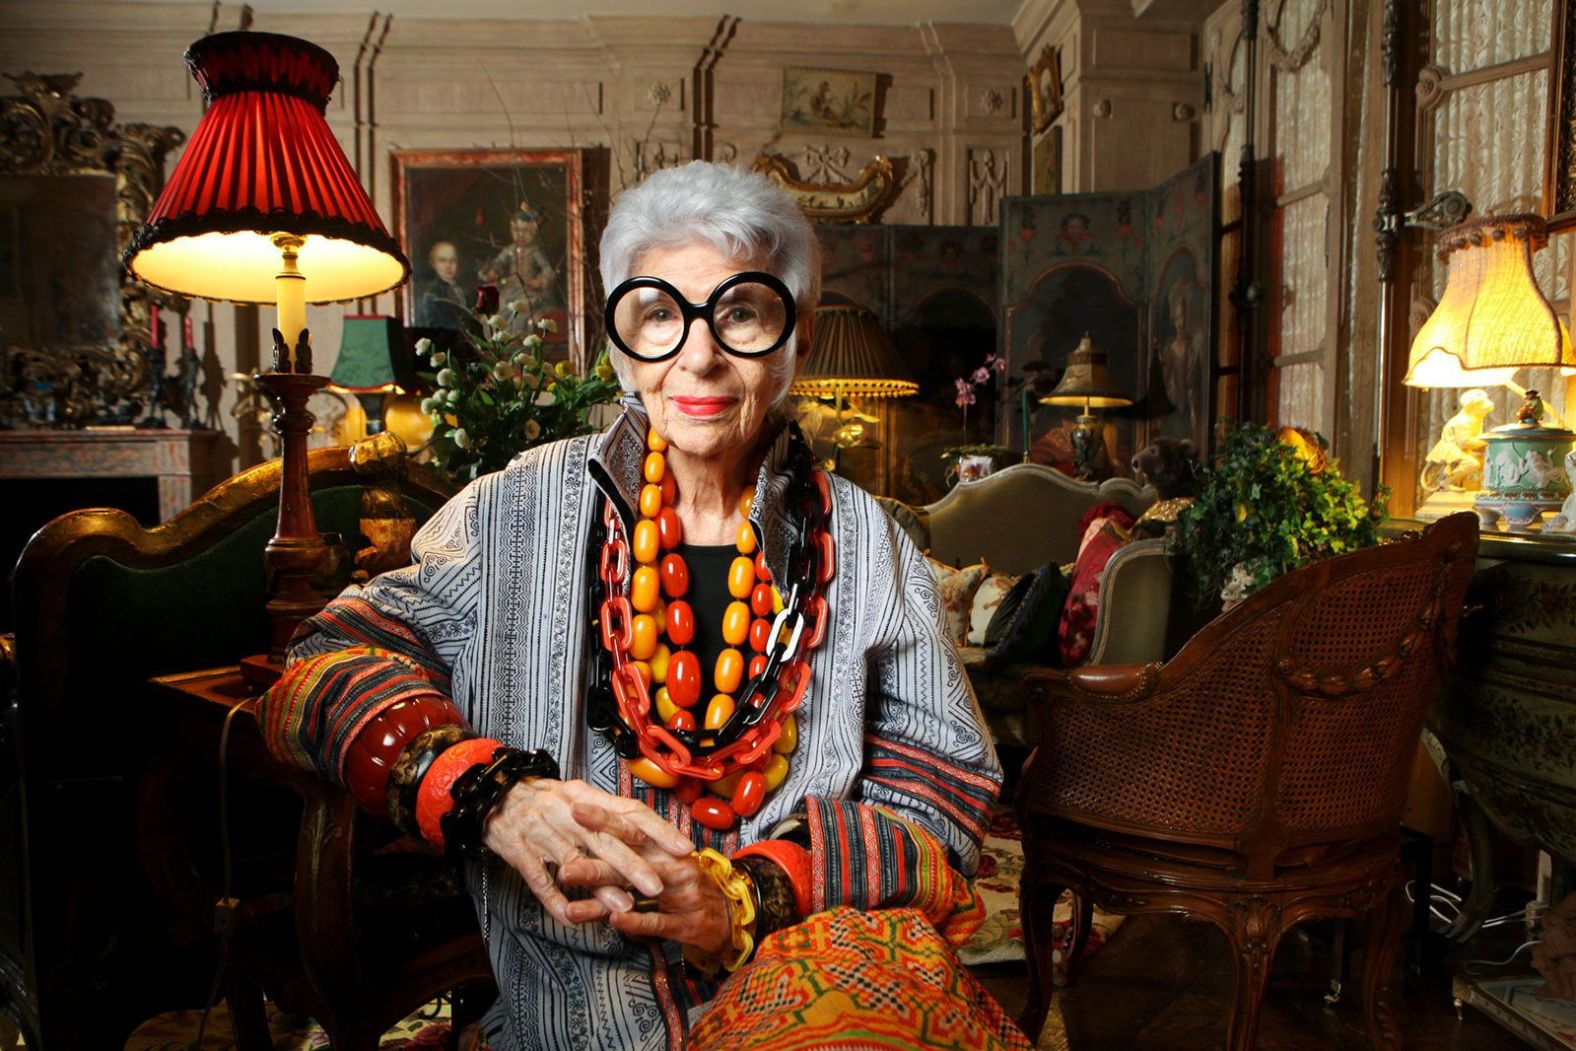 Influential interior designer <a href="index.php?page=&url=https%3A%2F%2Fwww.cnn.com%2F2024%2F03%2F01%2Fstyle%2Firis-apfel-fashion-icon-dies-obituary%2Findex.html" target="_blank">Iris Apfel</a>, a style icon who landed a major modeling contract at 97, died March 1 at the age of 102.